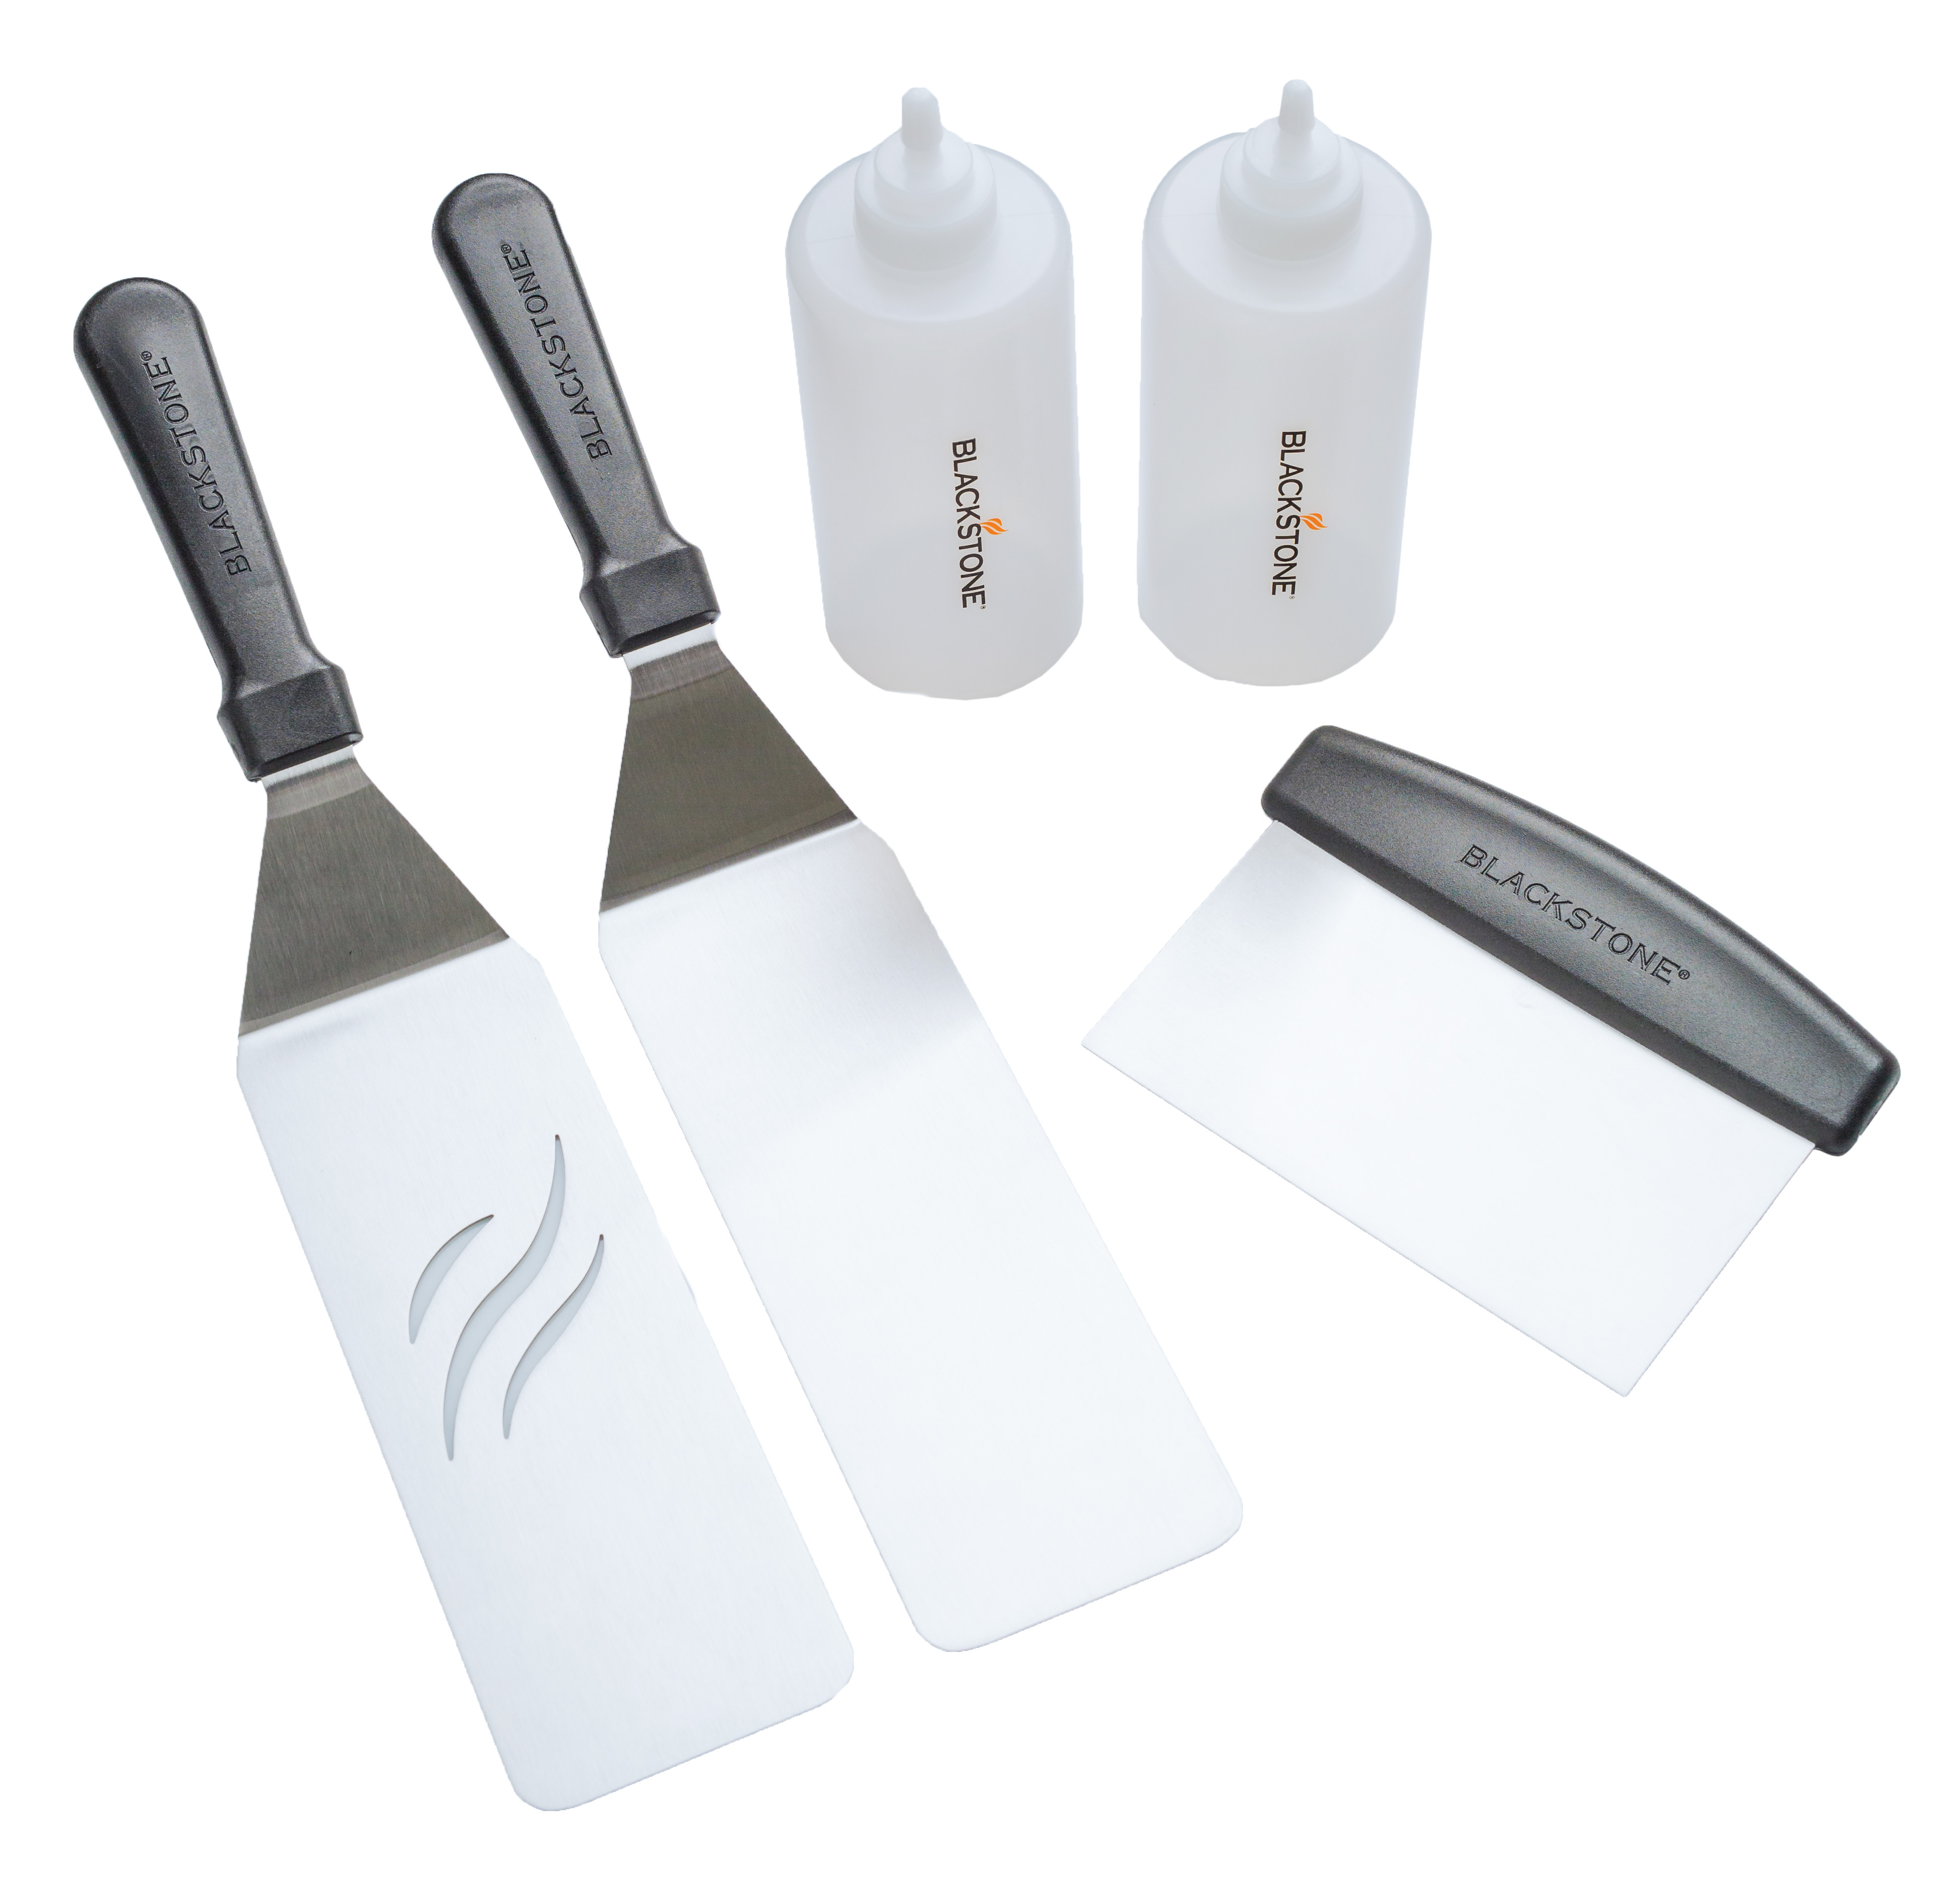 Blackstone Commercial Grade 5-Piece Griddle Cooking Toolkit - image 1 of 8